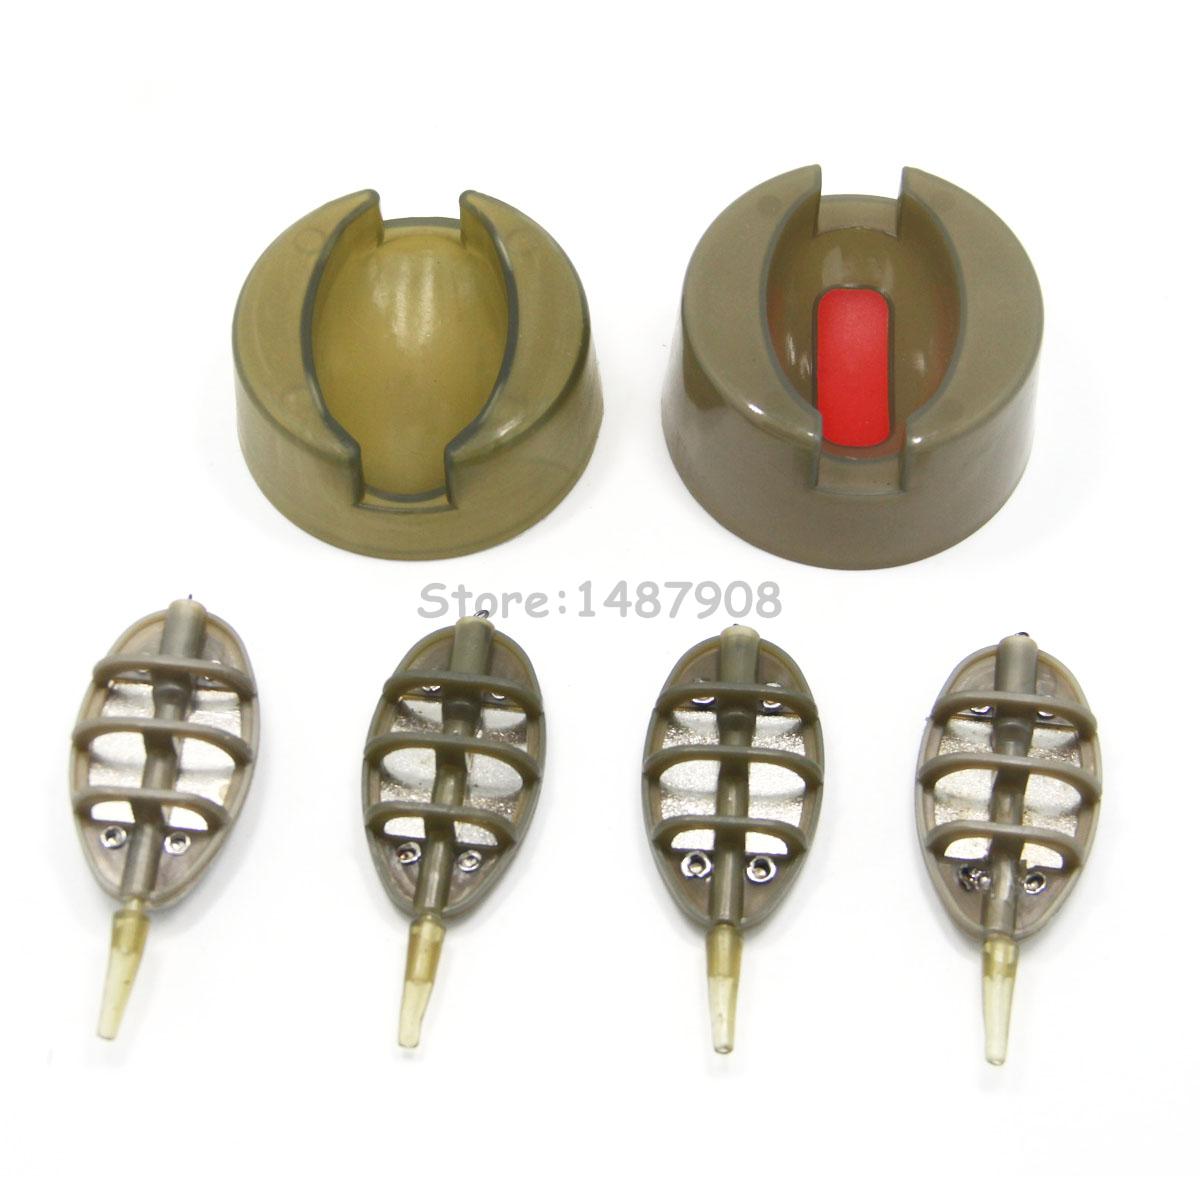 Image of Carp Fishing Inline Method Feeder Set - 4 Feeders 15g,20g,25g,35g & 1 Mould , Extra free 1 Quick Release Mould A006